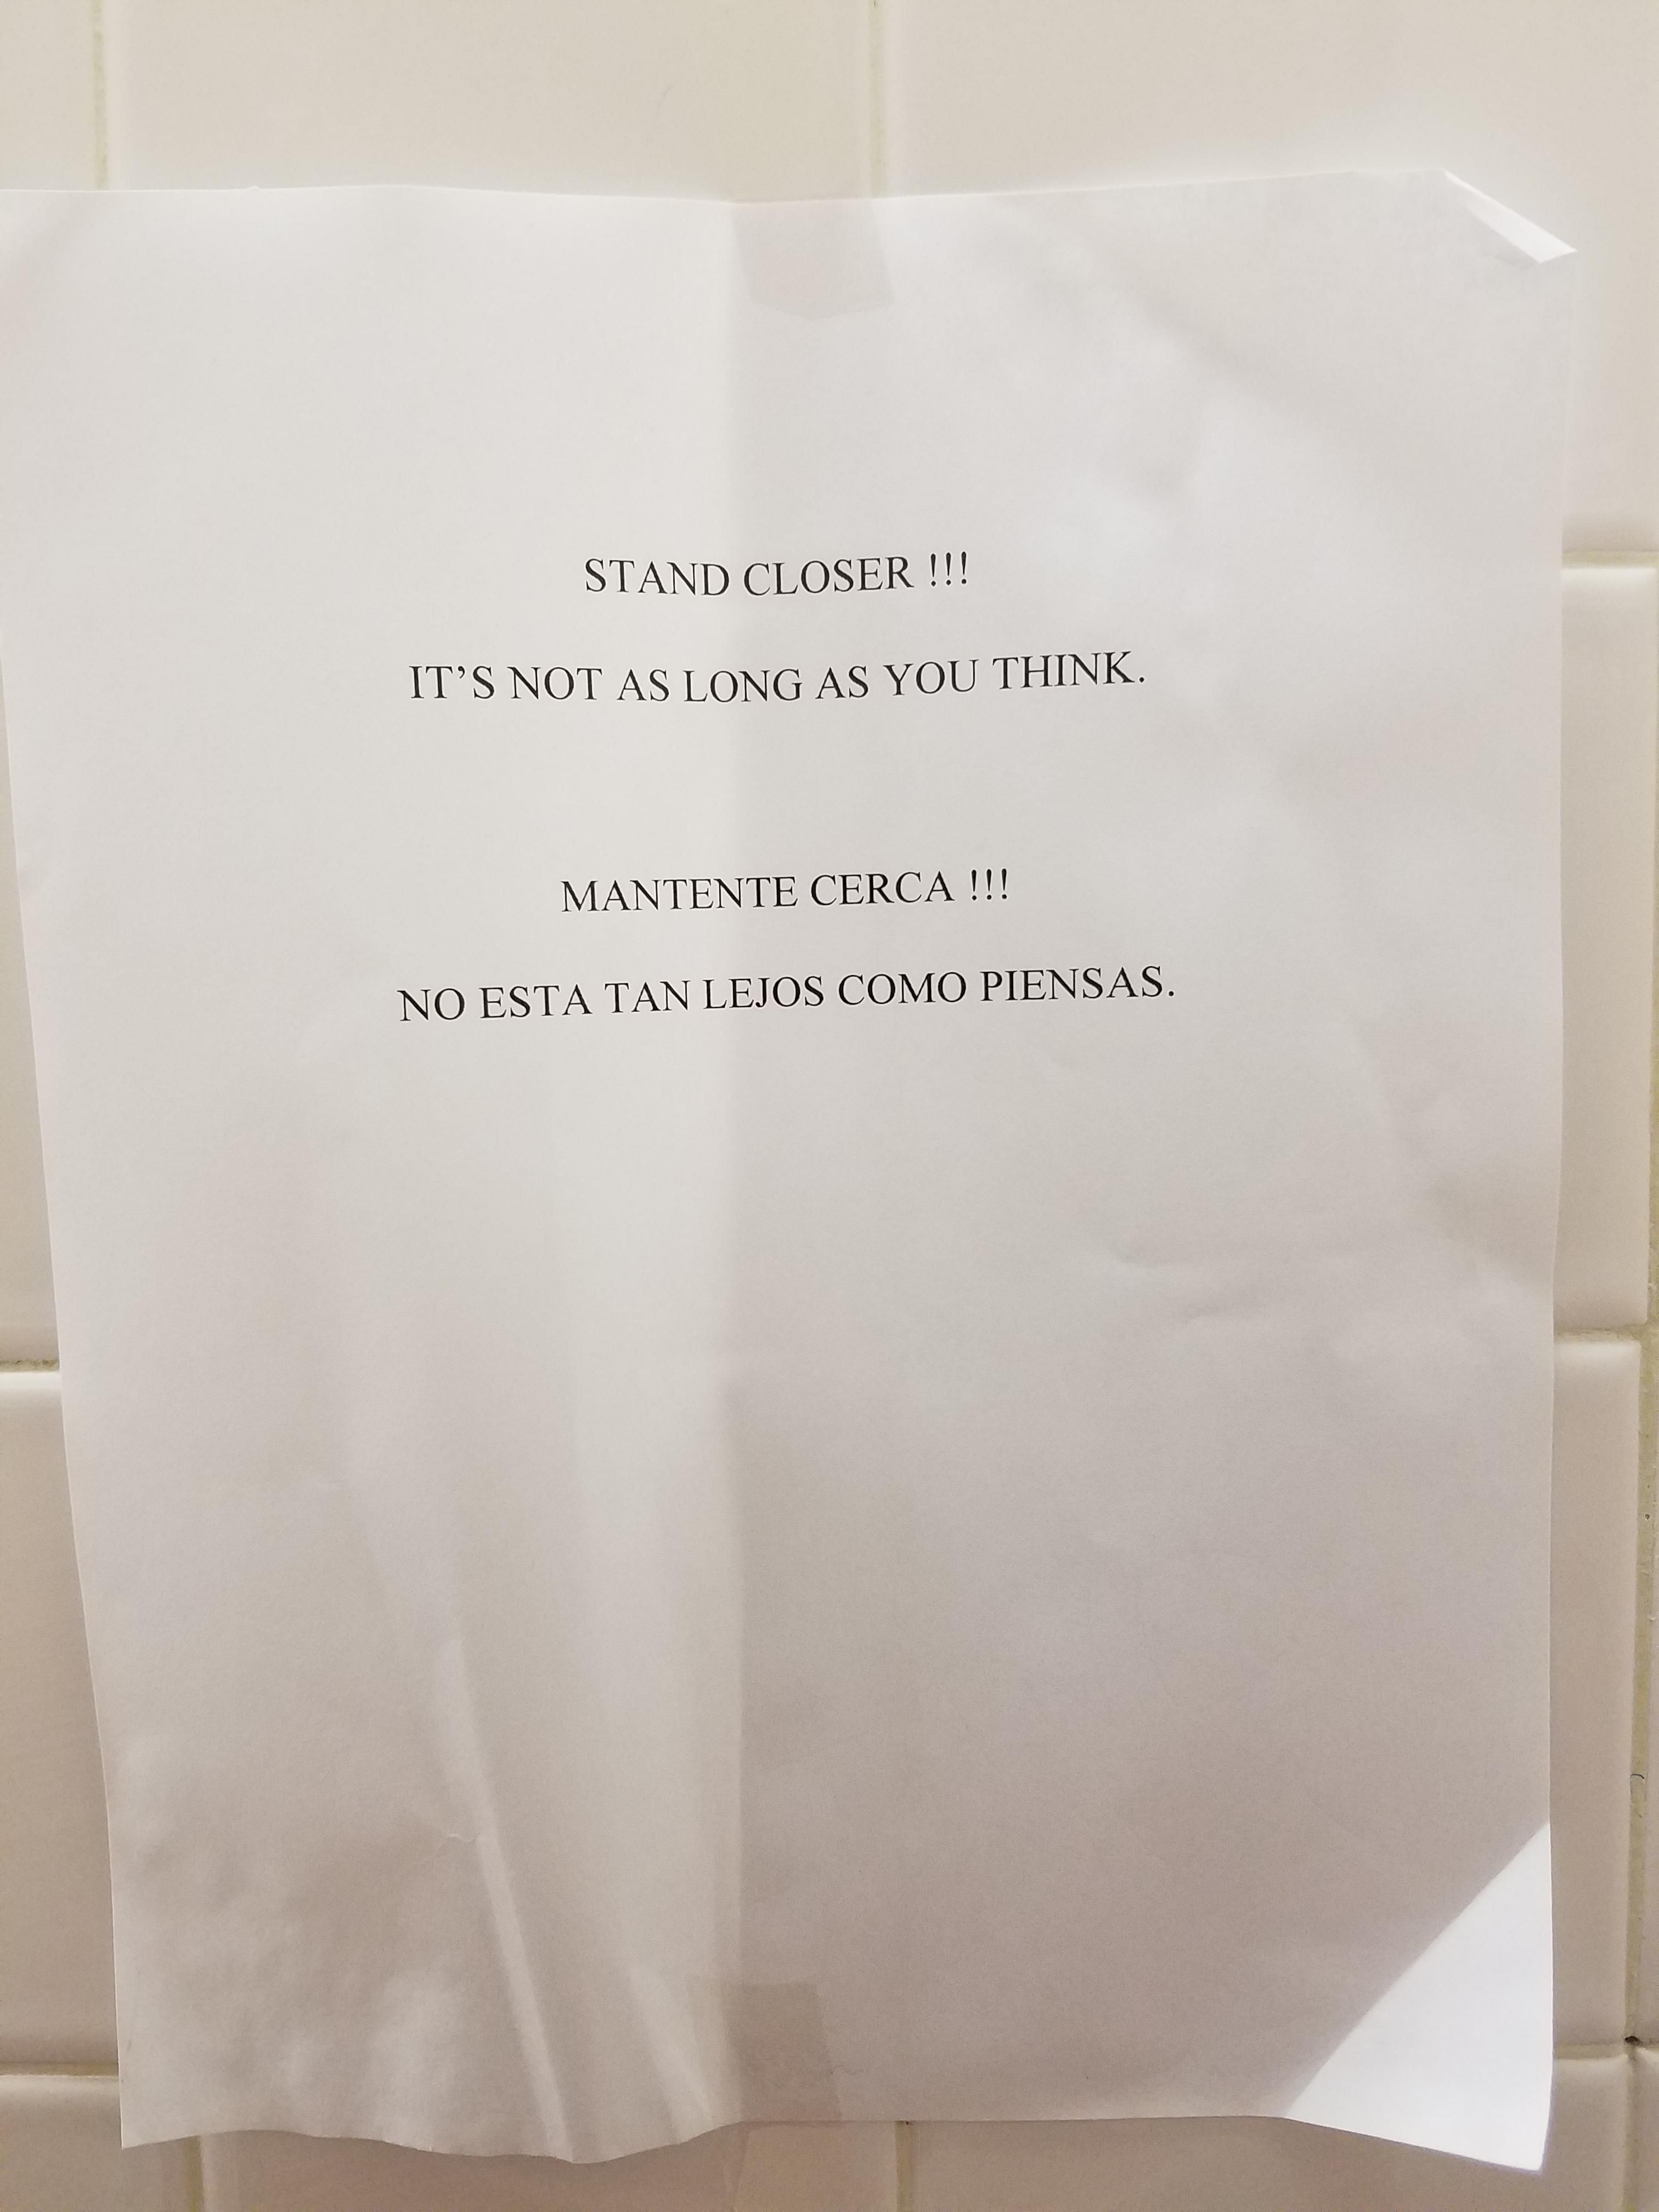 The cleaning ladies at my job are brutal. This was hanging above the urinal.